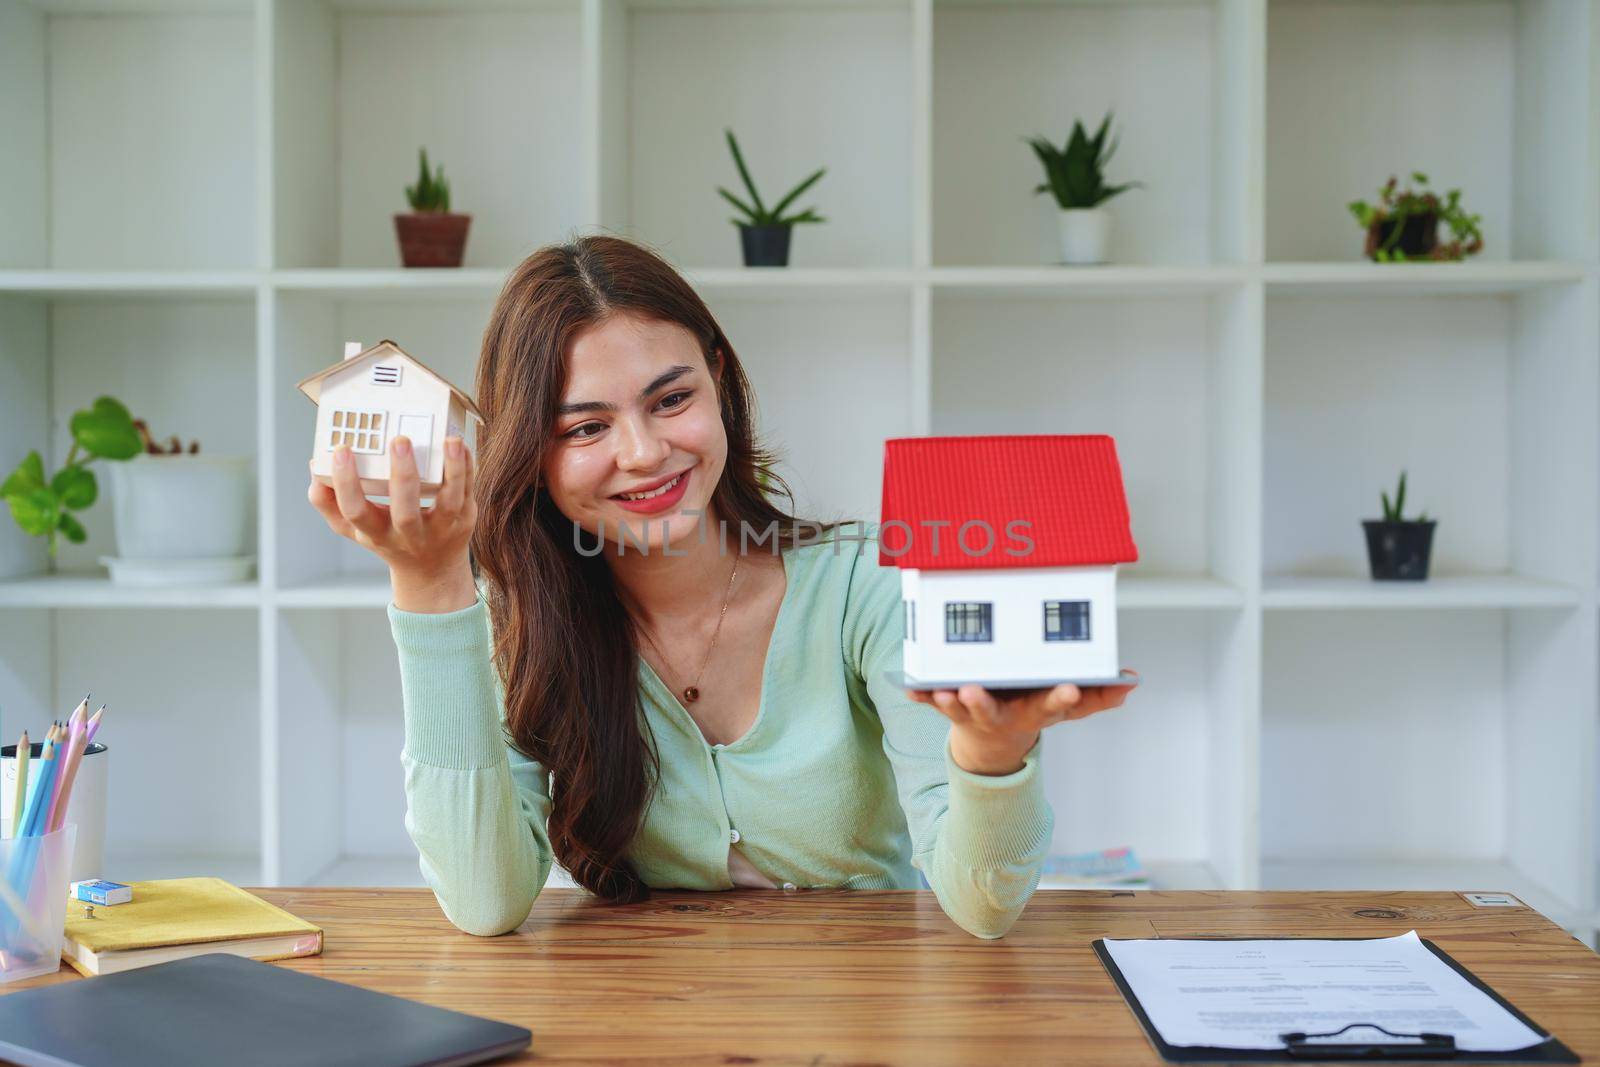 The client select a house model, inspector concept of a home before making a decision to invest, make a loan, get insurance and sign important documents with the bank